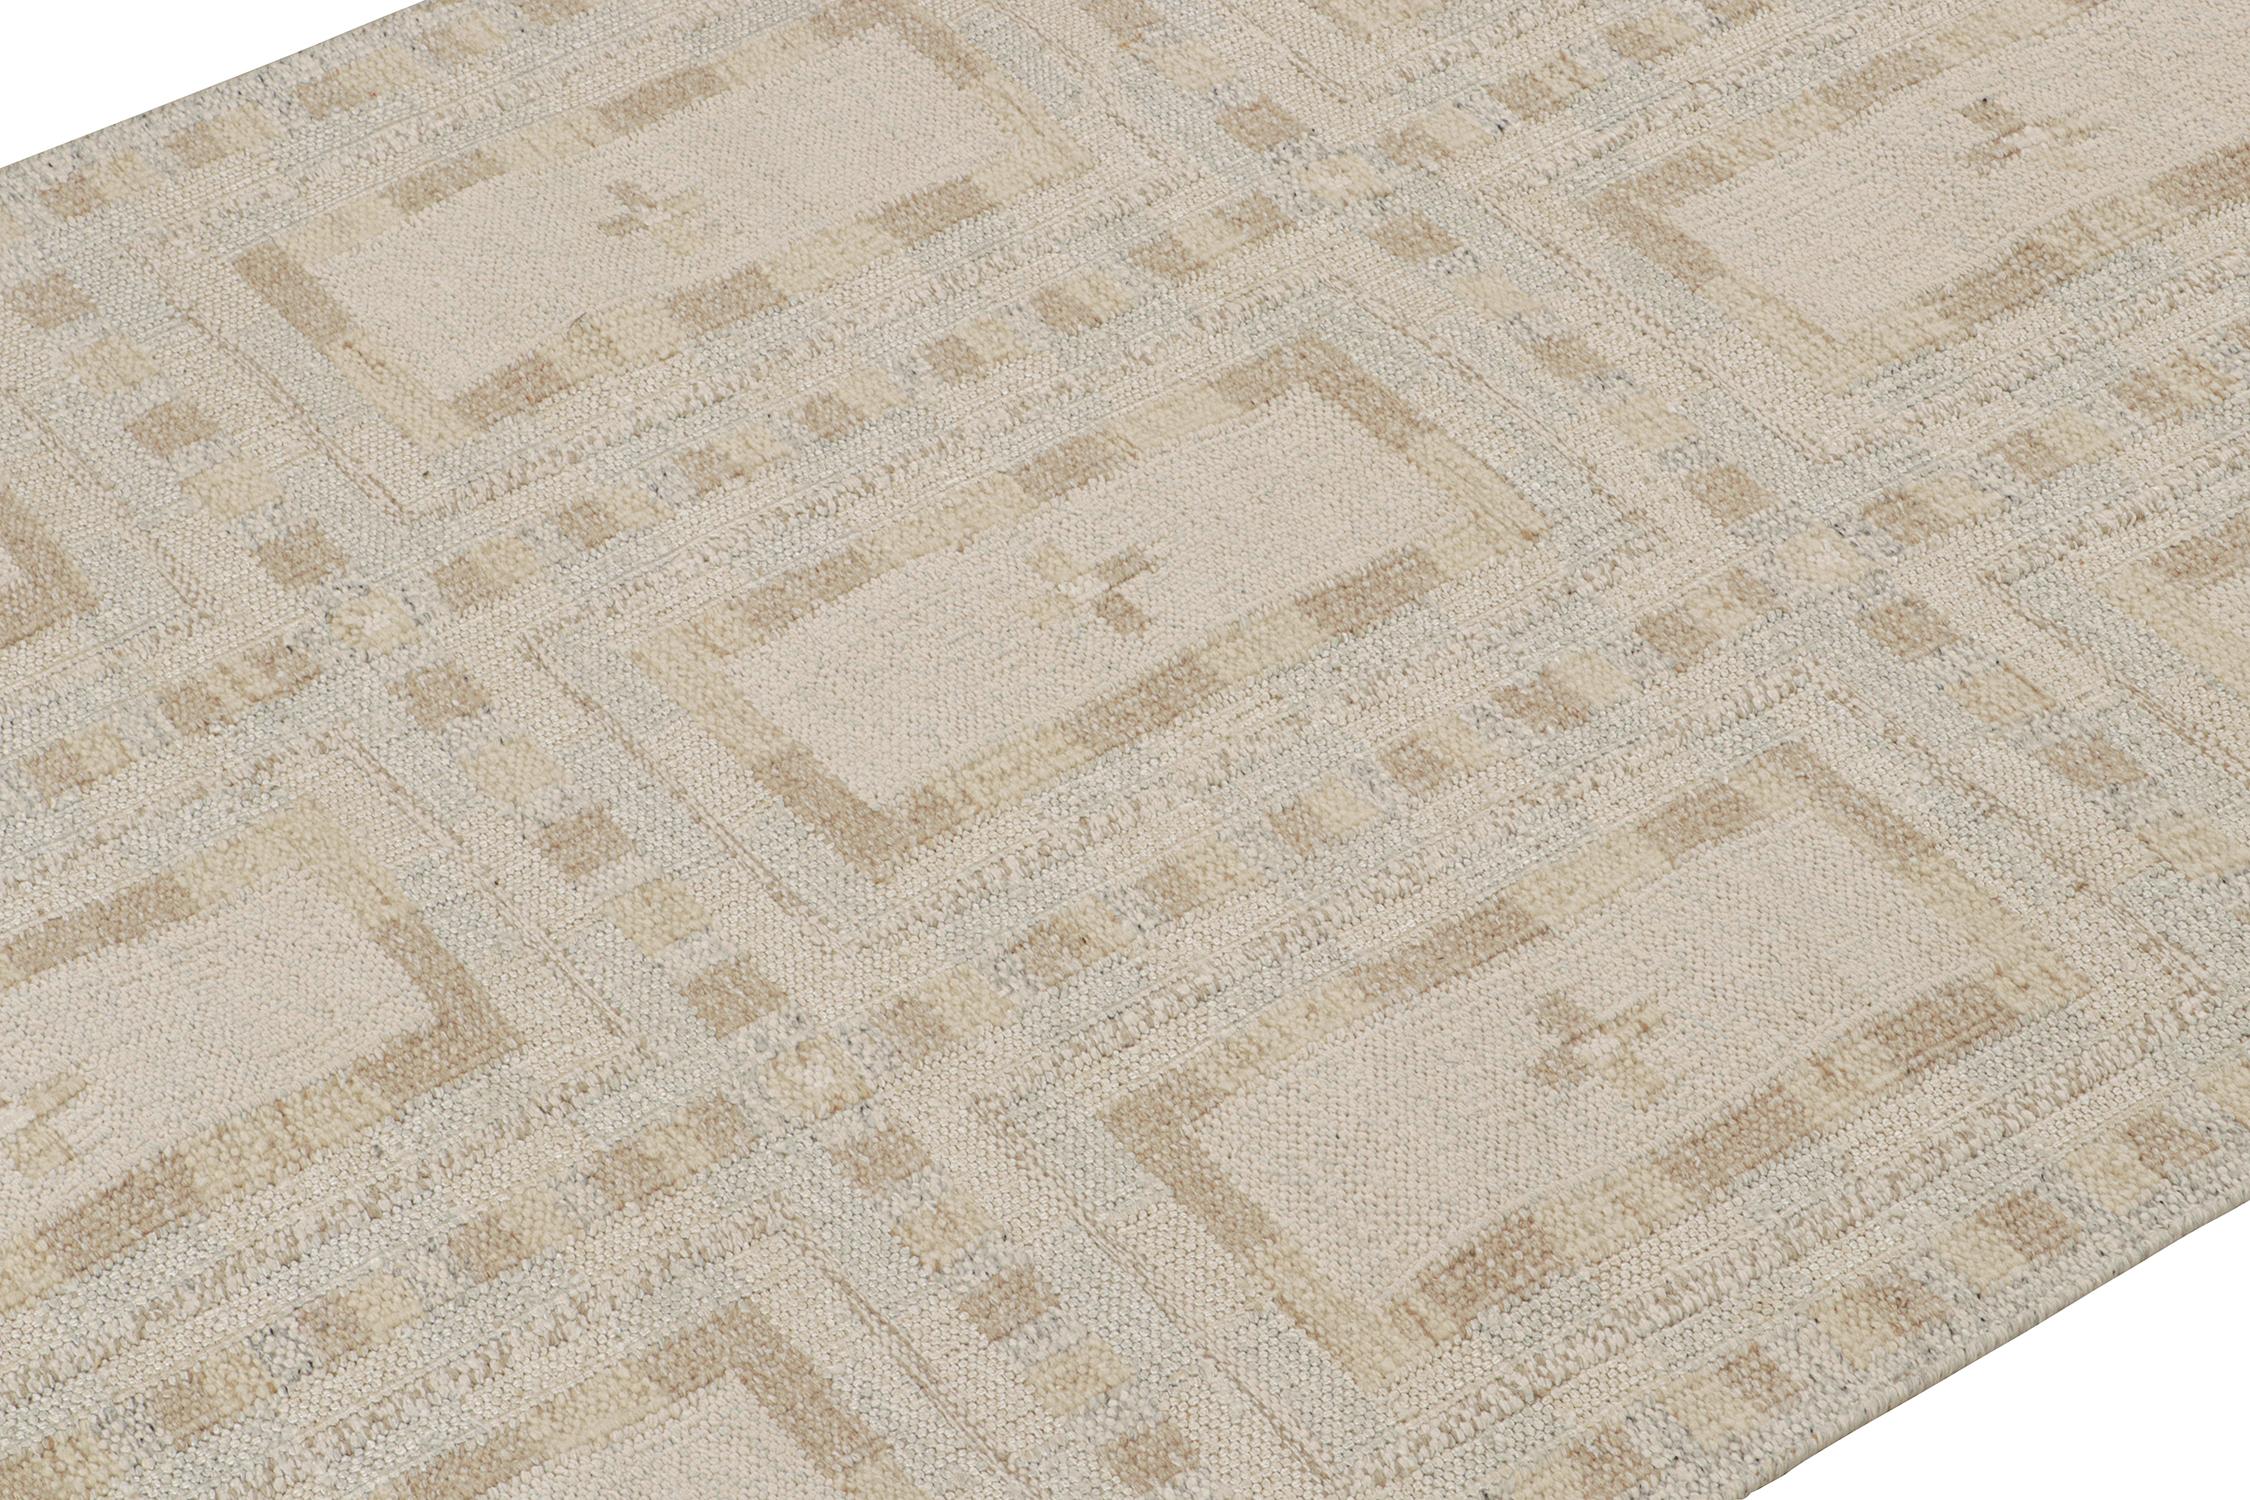 Indian Rug & Kilim’s Scandinavian Style Kilim in White with Beige Geometric Patterns For Sale